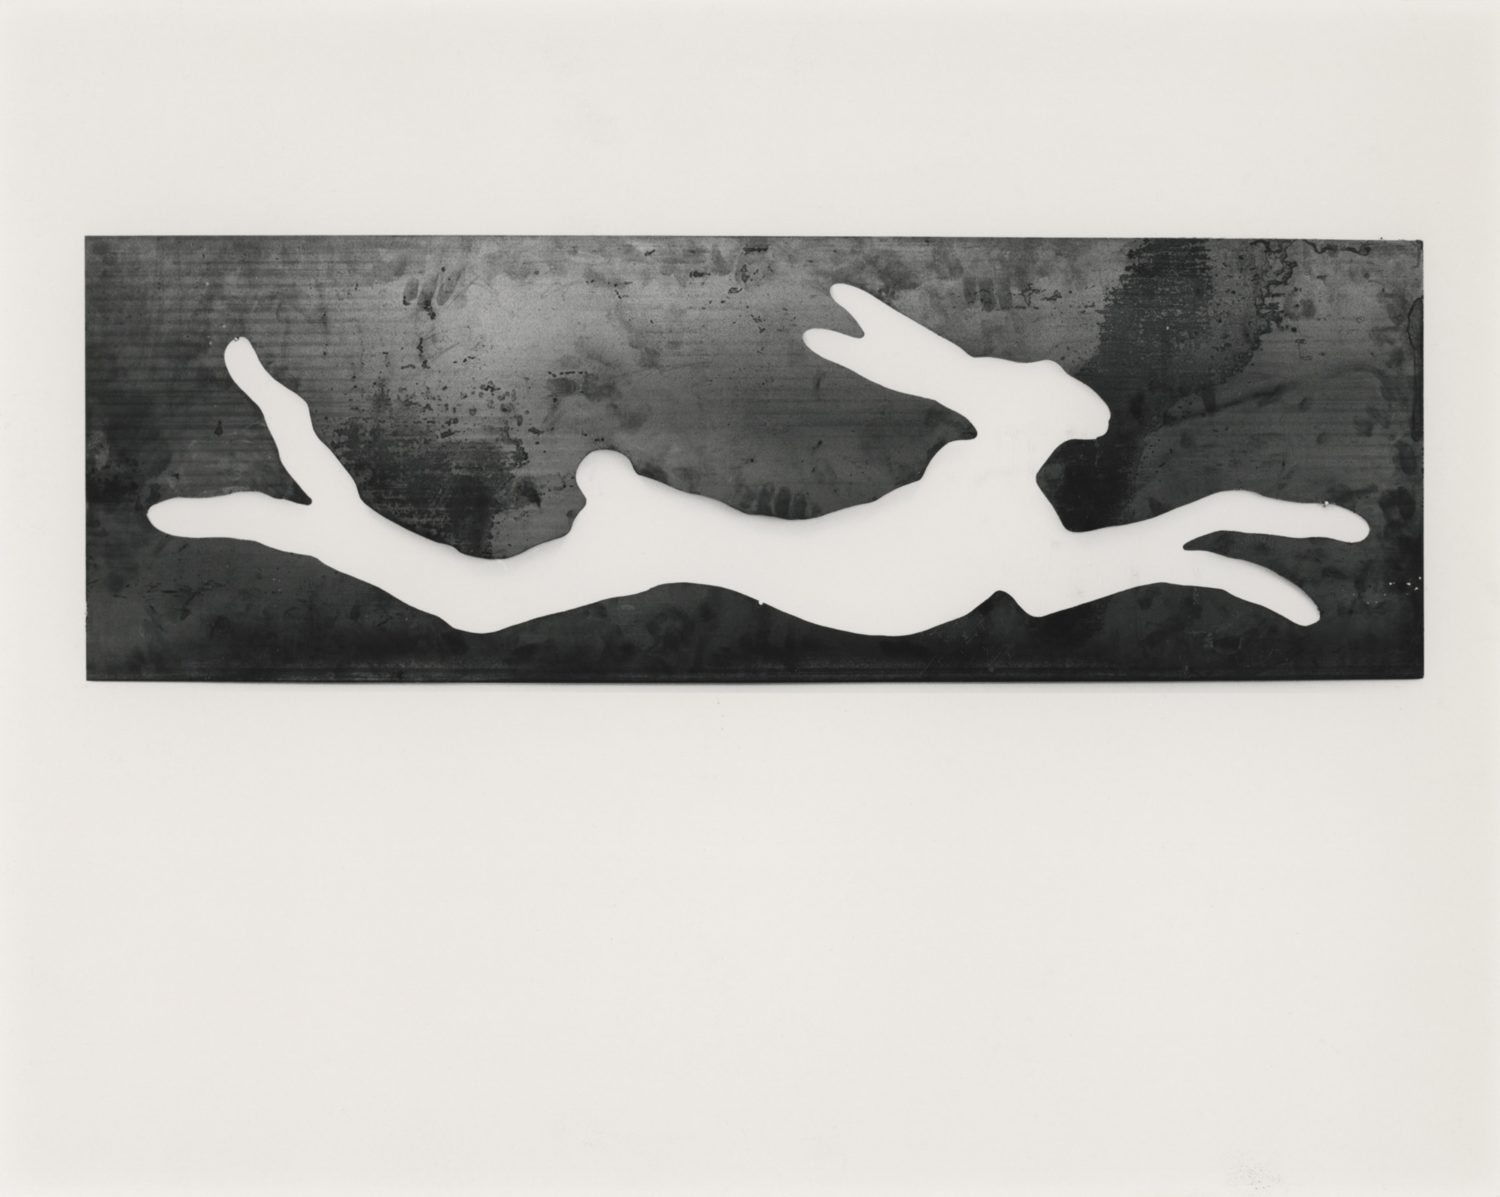 Leaping Hare Weathervane (negative)